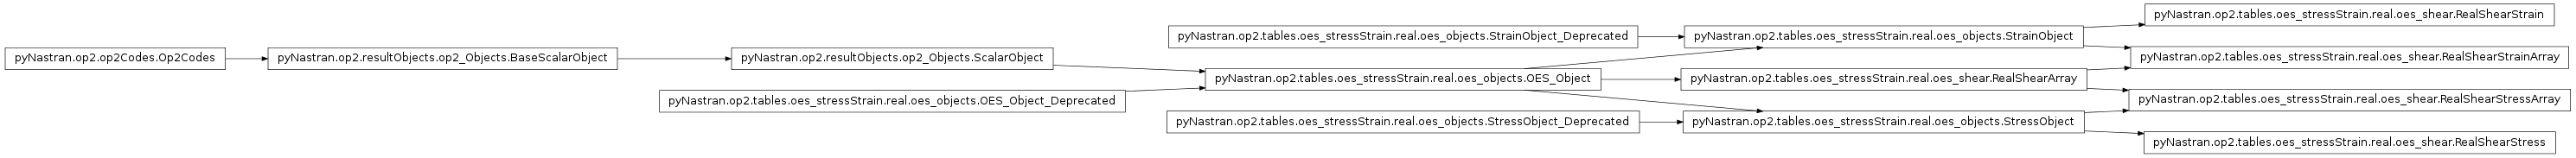 Inheritance diagram of pyNastran.op2.tables.oes_stressStrain.real.oes_shear